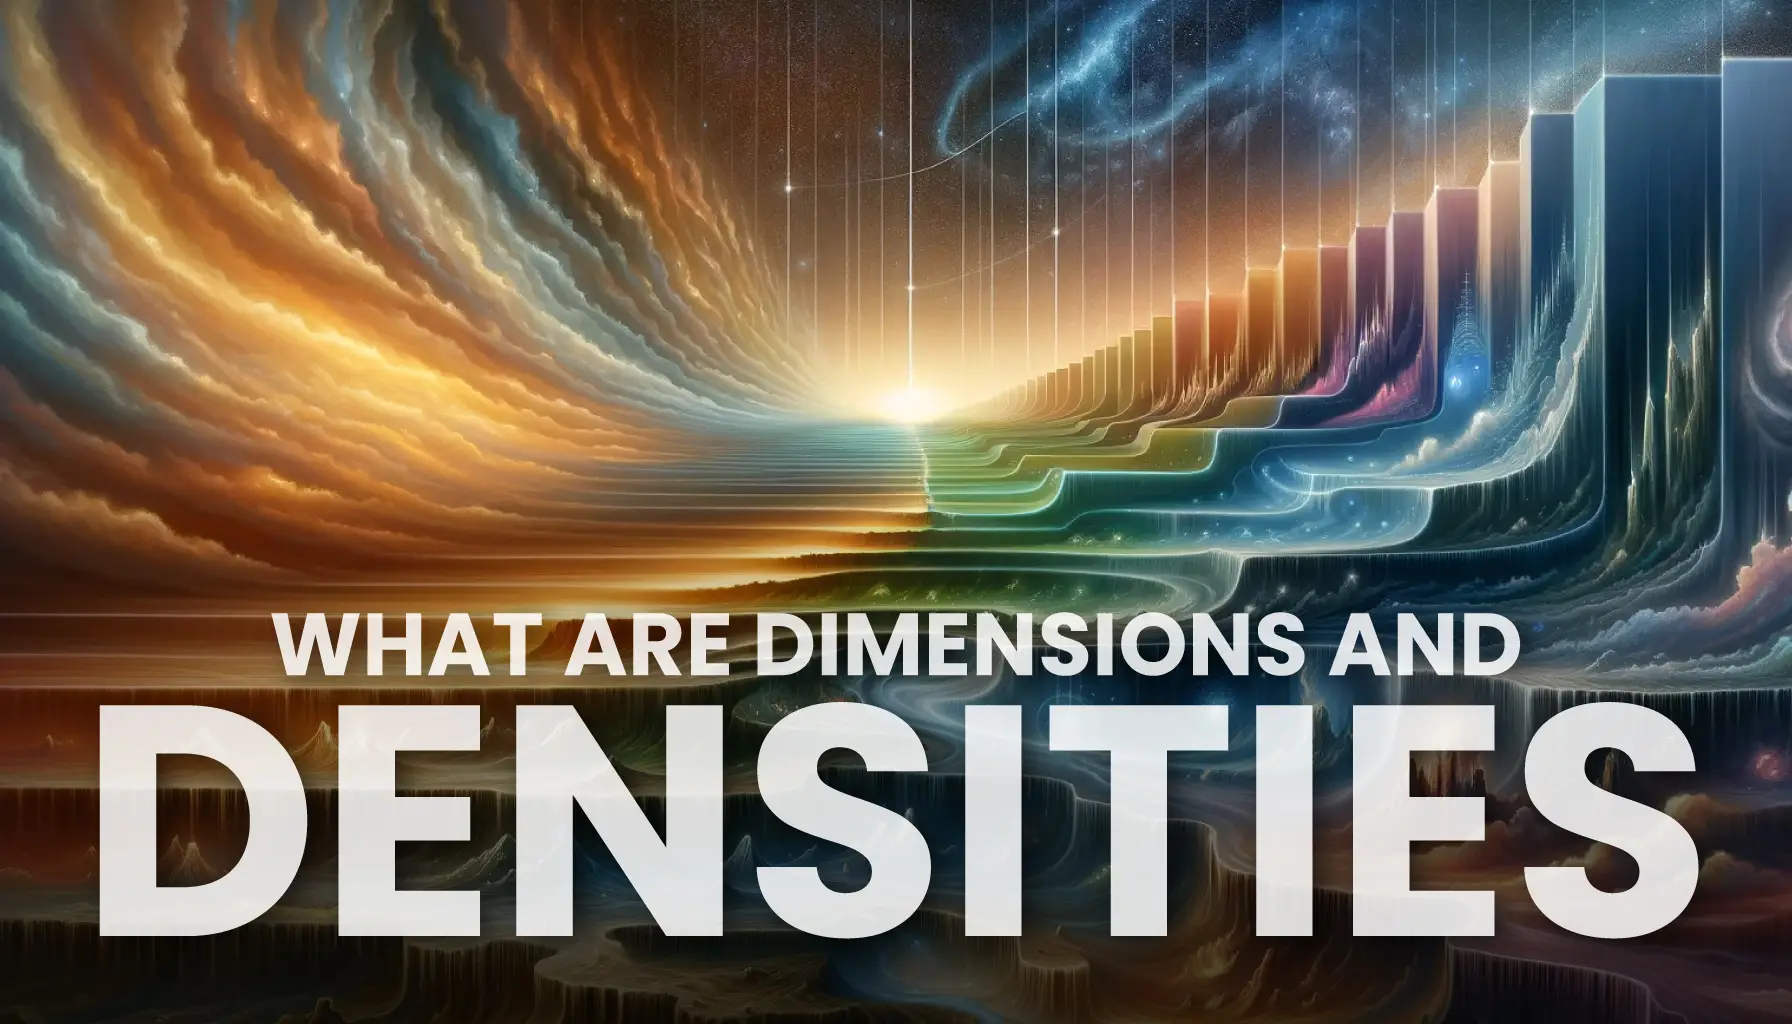 DIMENSIONS vs DENSITIES: What Are They? 3D, 4D, 5D & BEYOND!